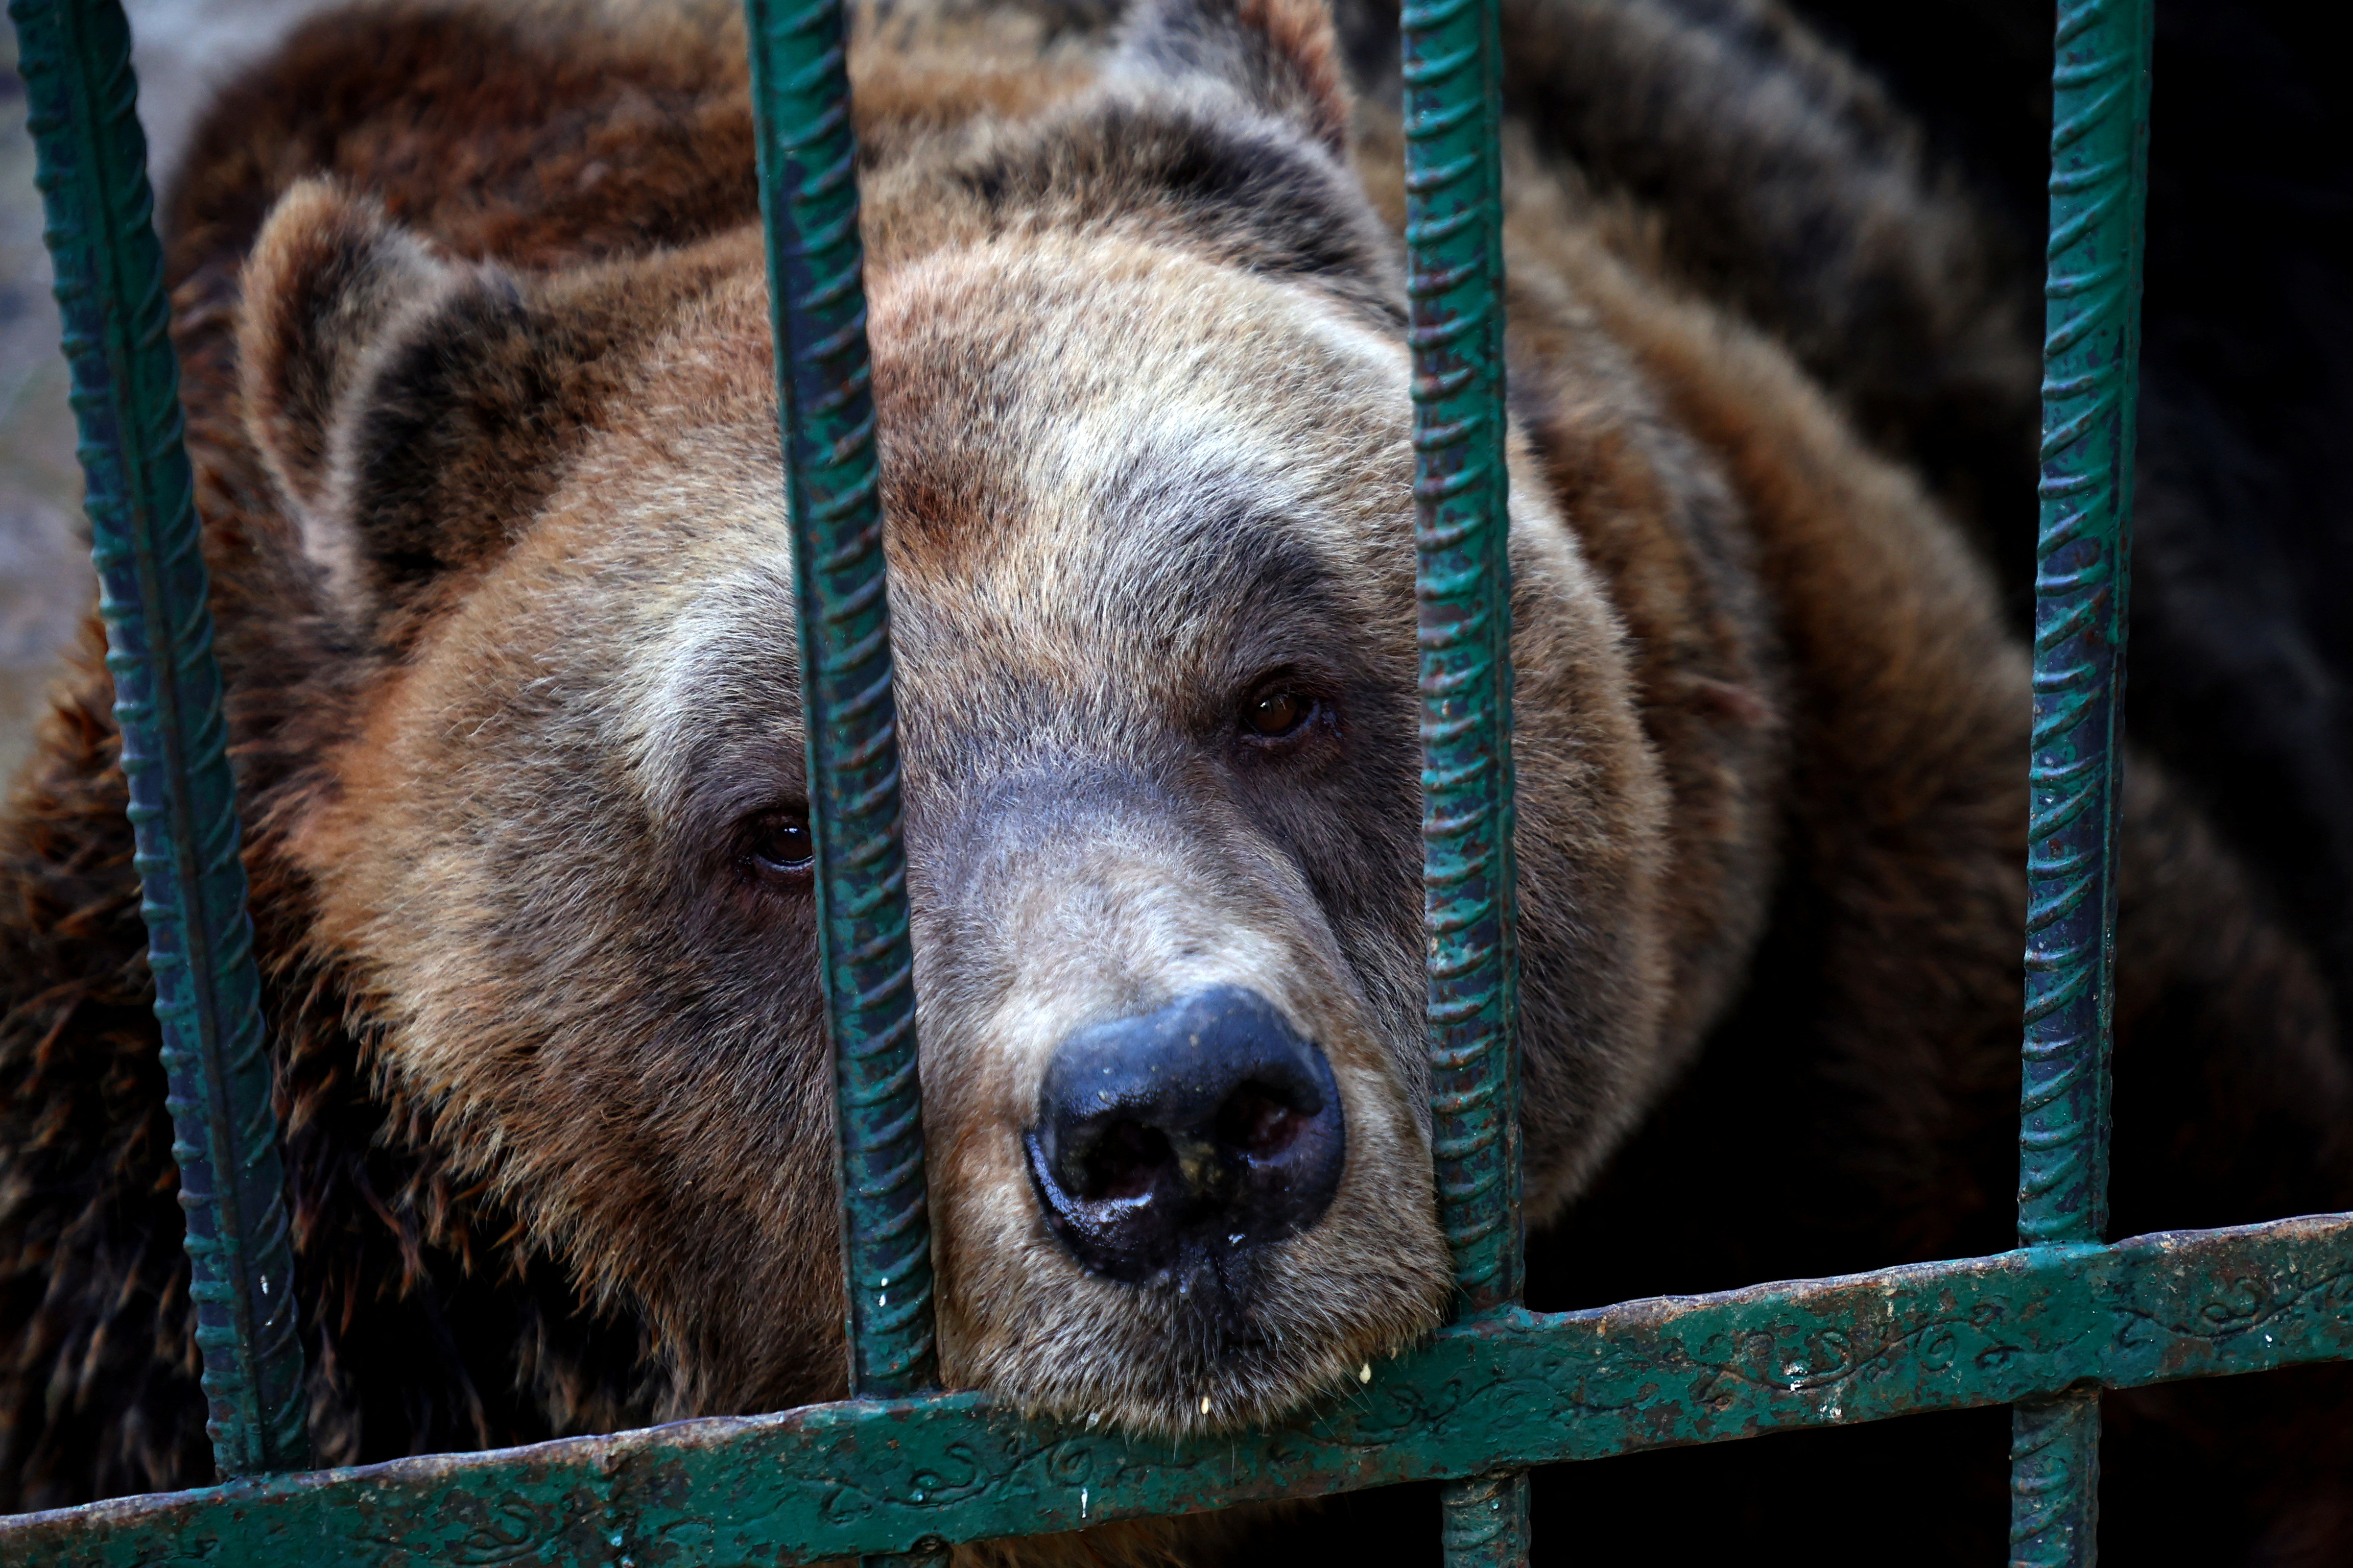 Mark, a 24 year old brown bear sits inside a cage in a restaurant in Tirana